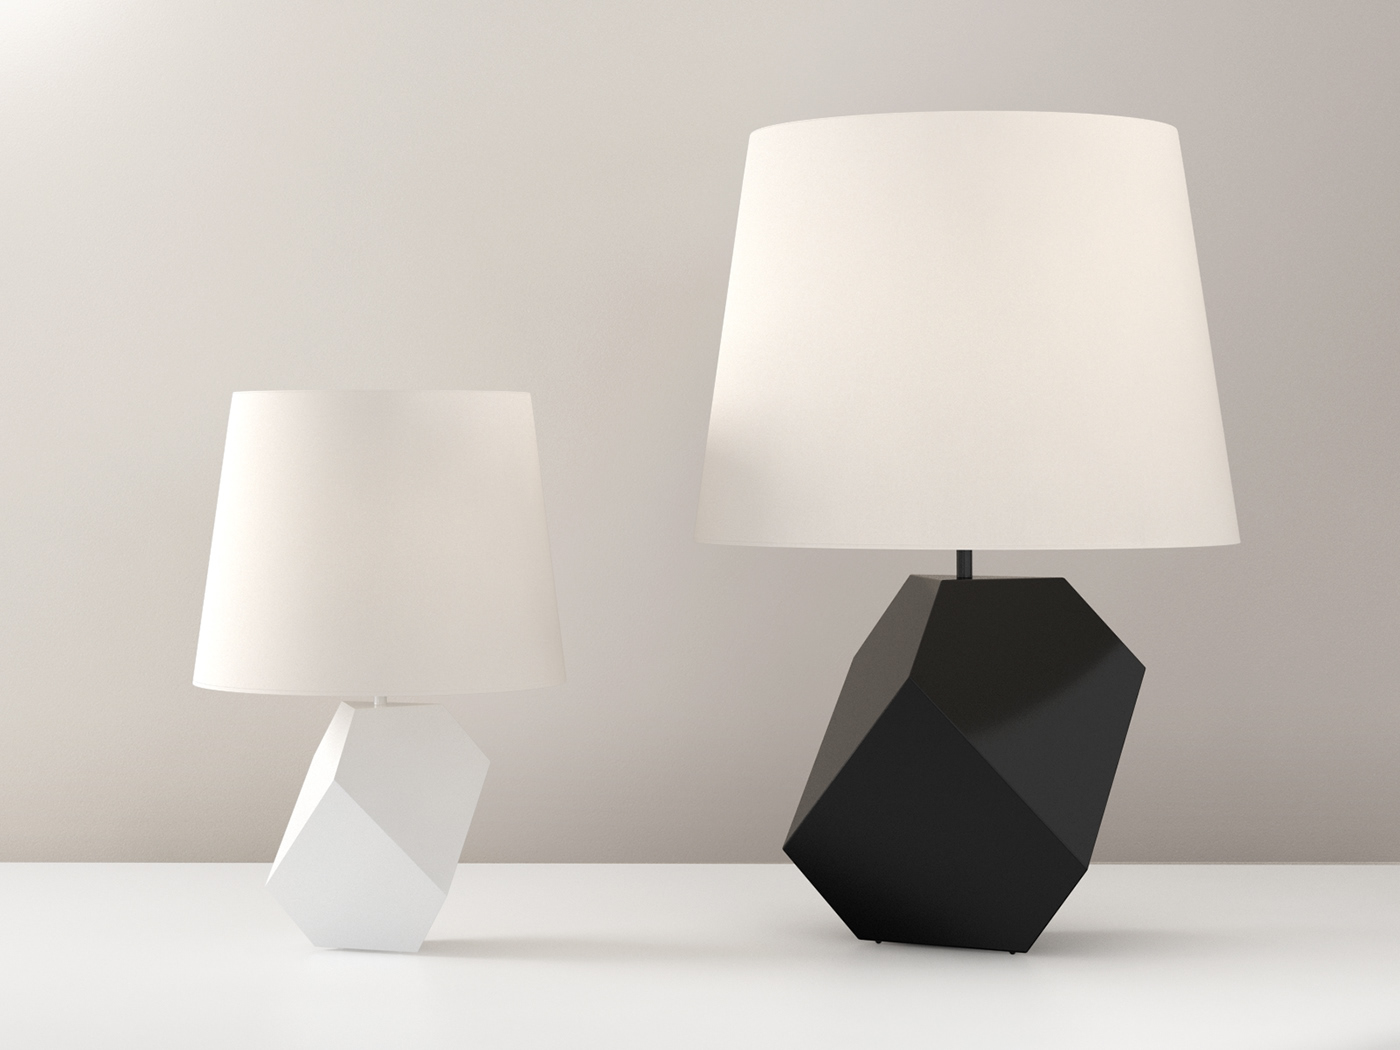 freebie table lamp table light lighting design connected FREE 3d model nicolas aubagnac black and white CG Content